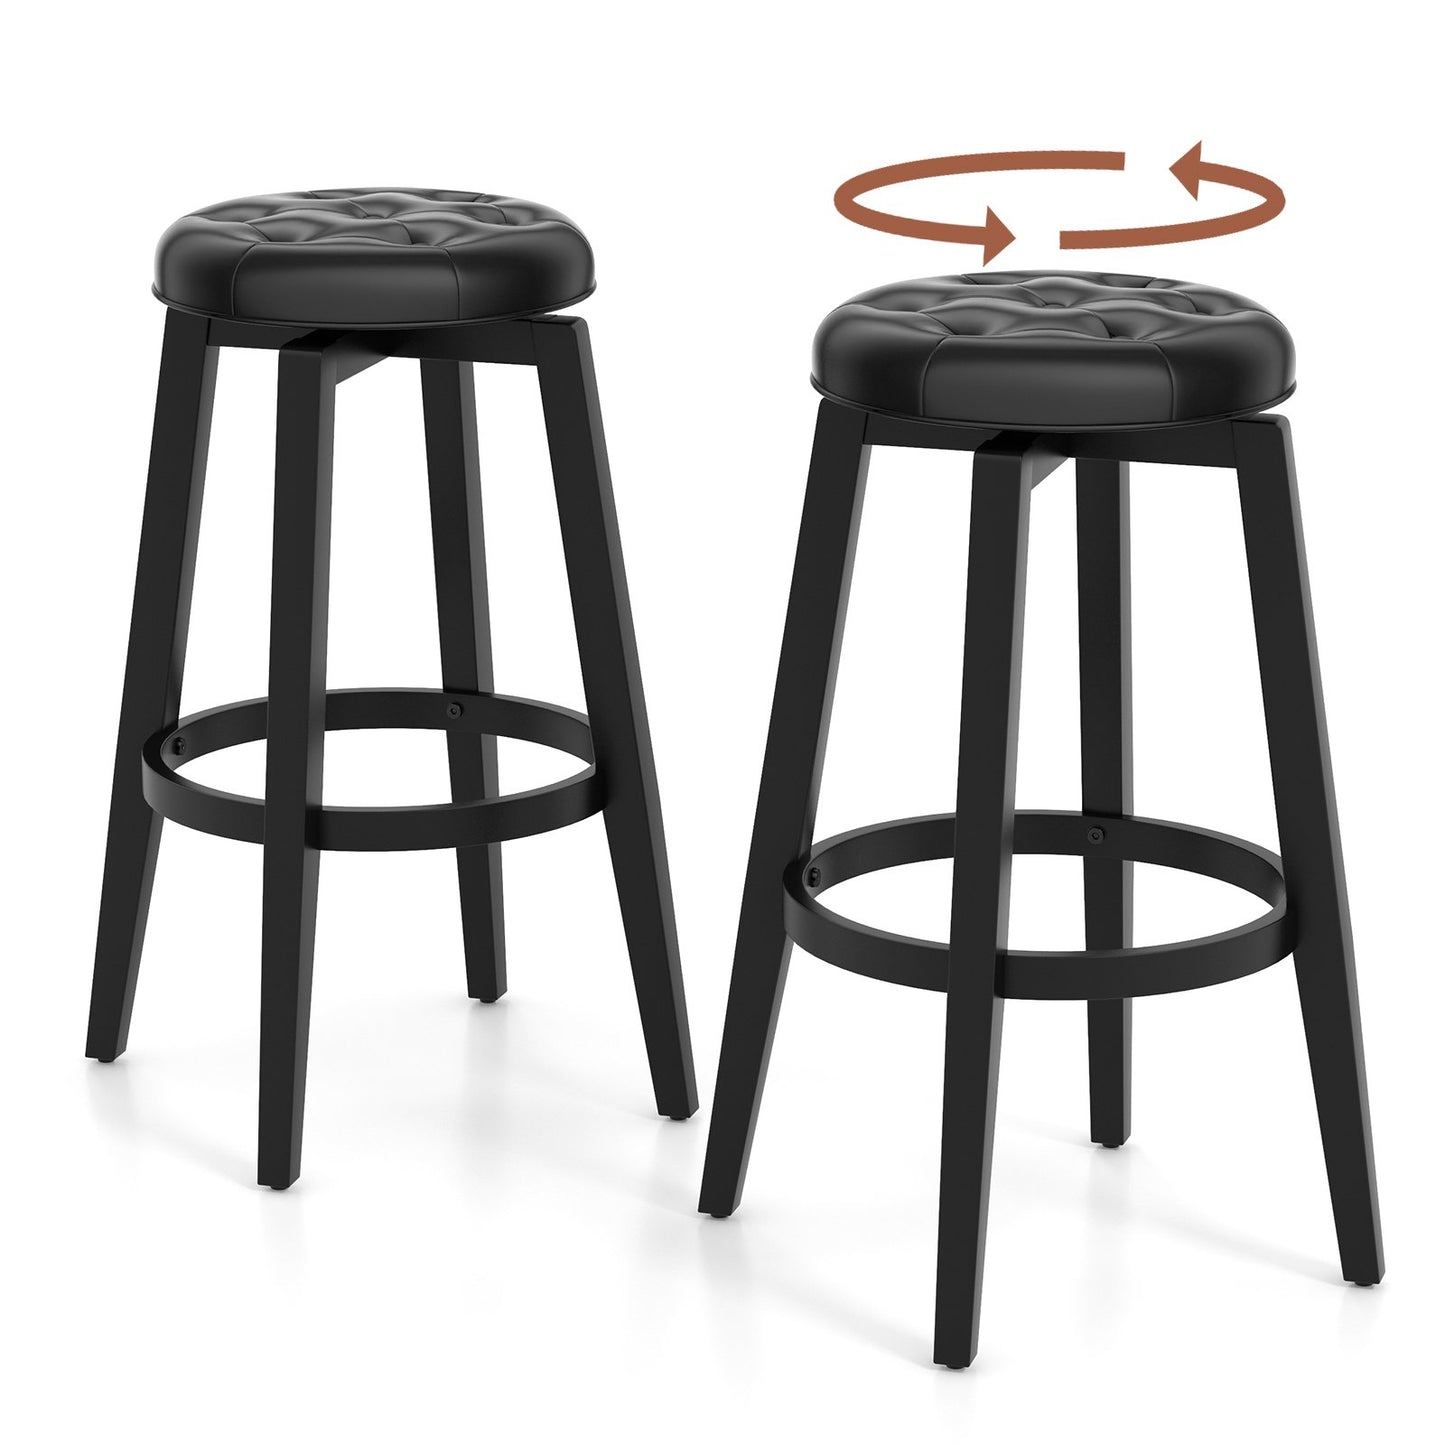 360° Swivel Upholstered Rubberwood Frame Bar Stool Set of 2 with Footrest-29 inches